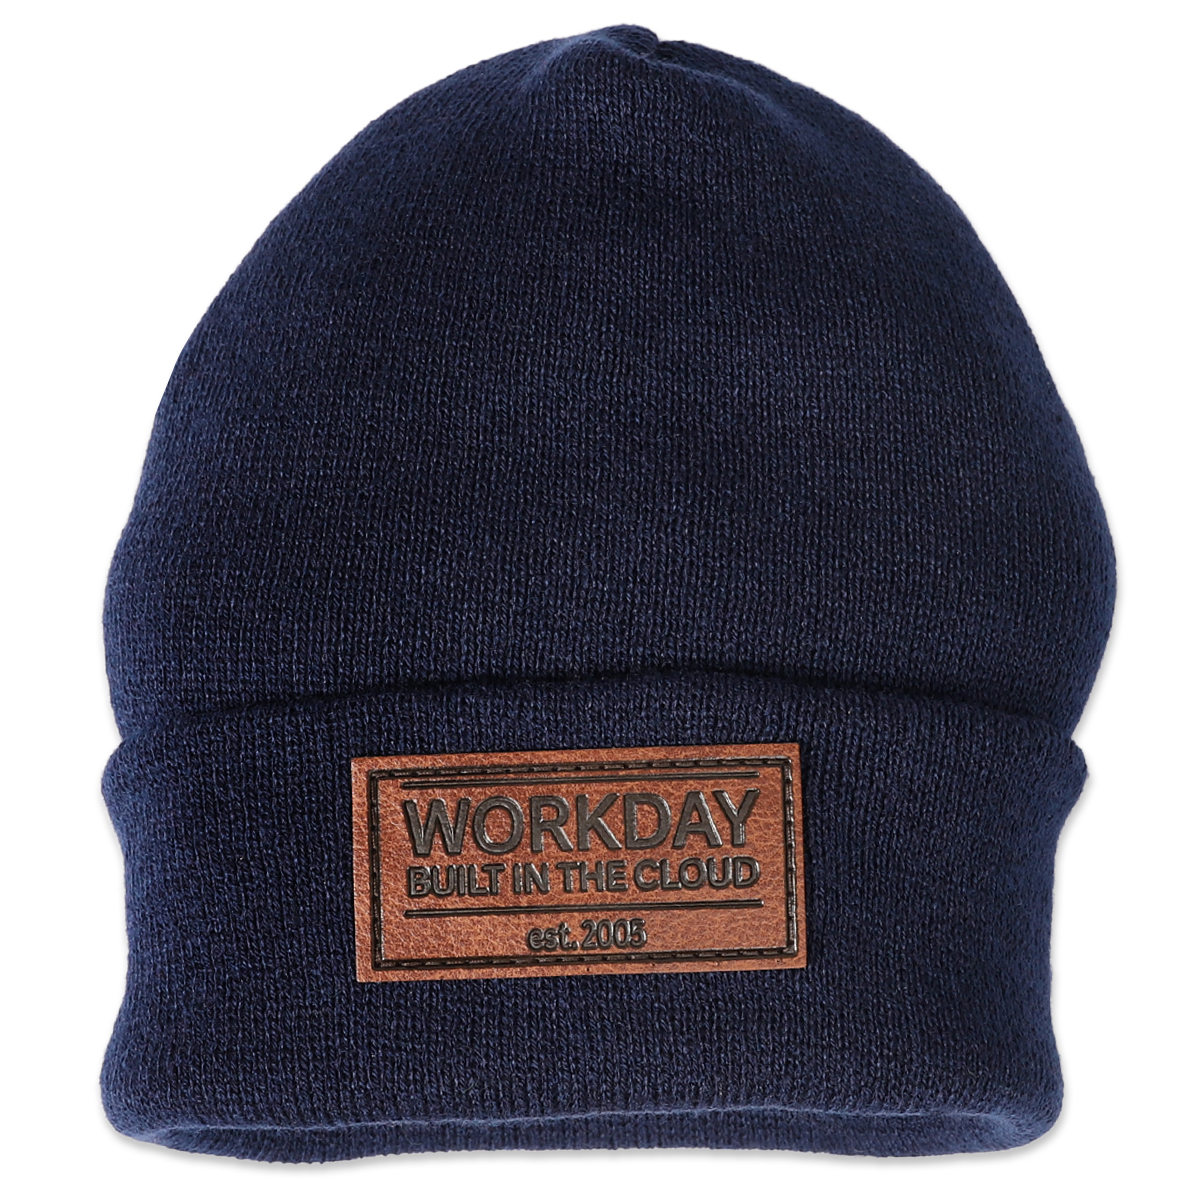 USA Made Sustainable Knit Cap with Cuff